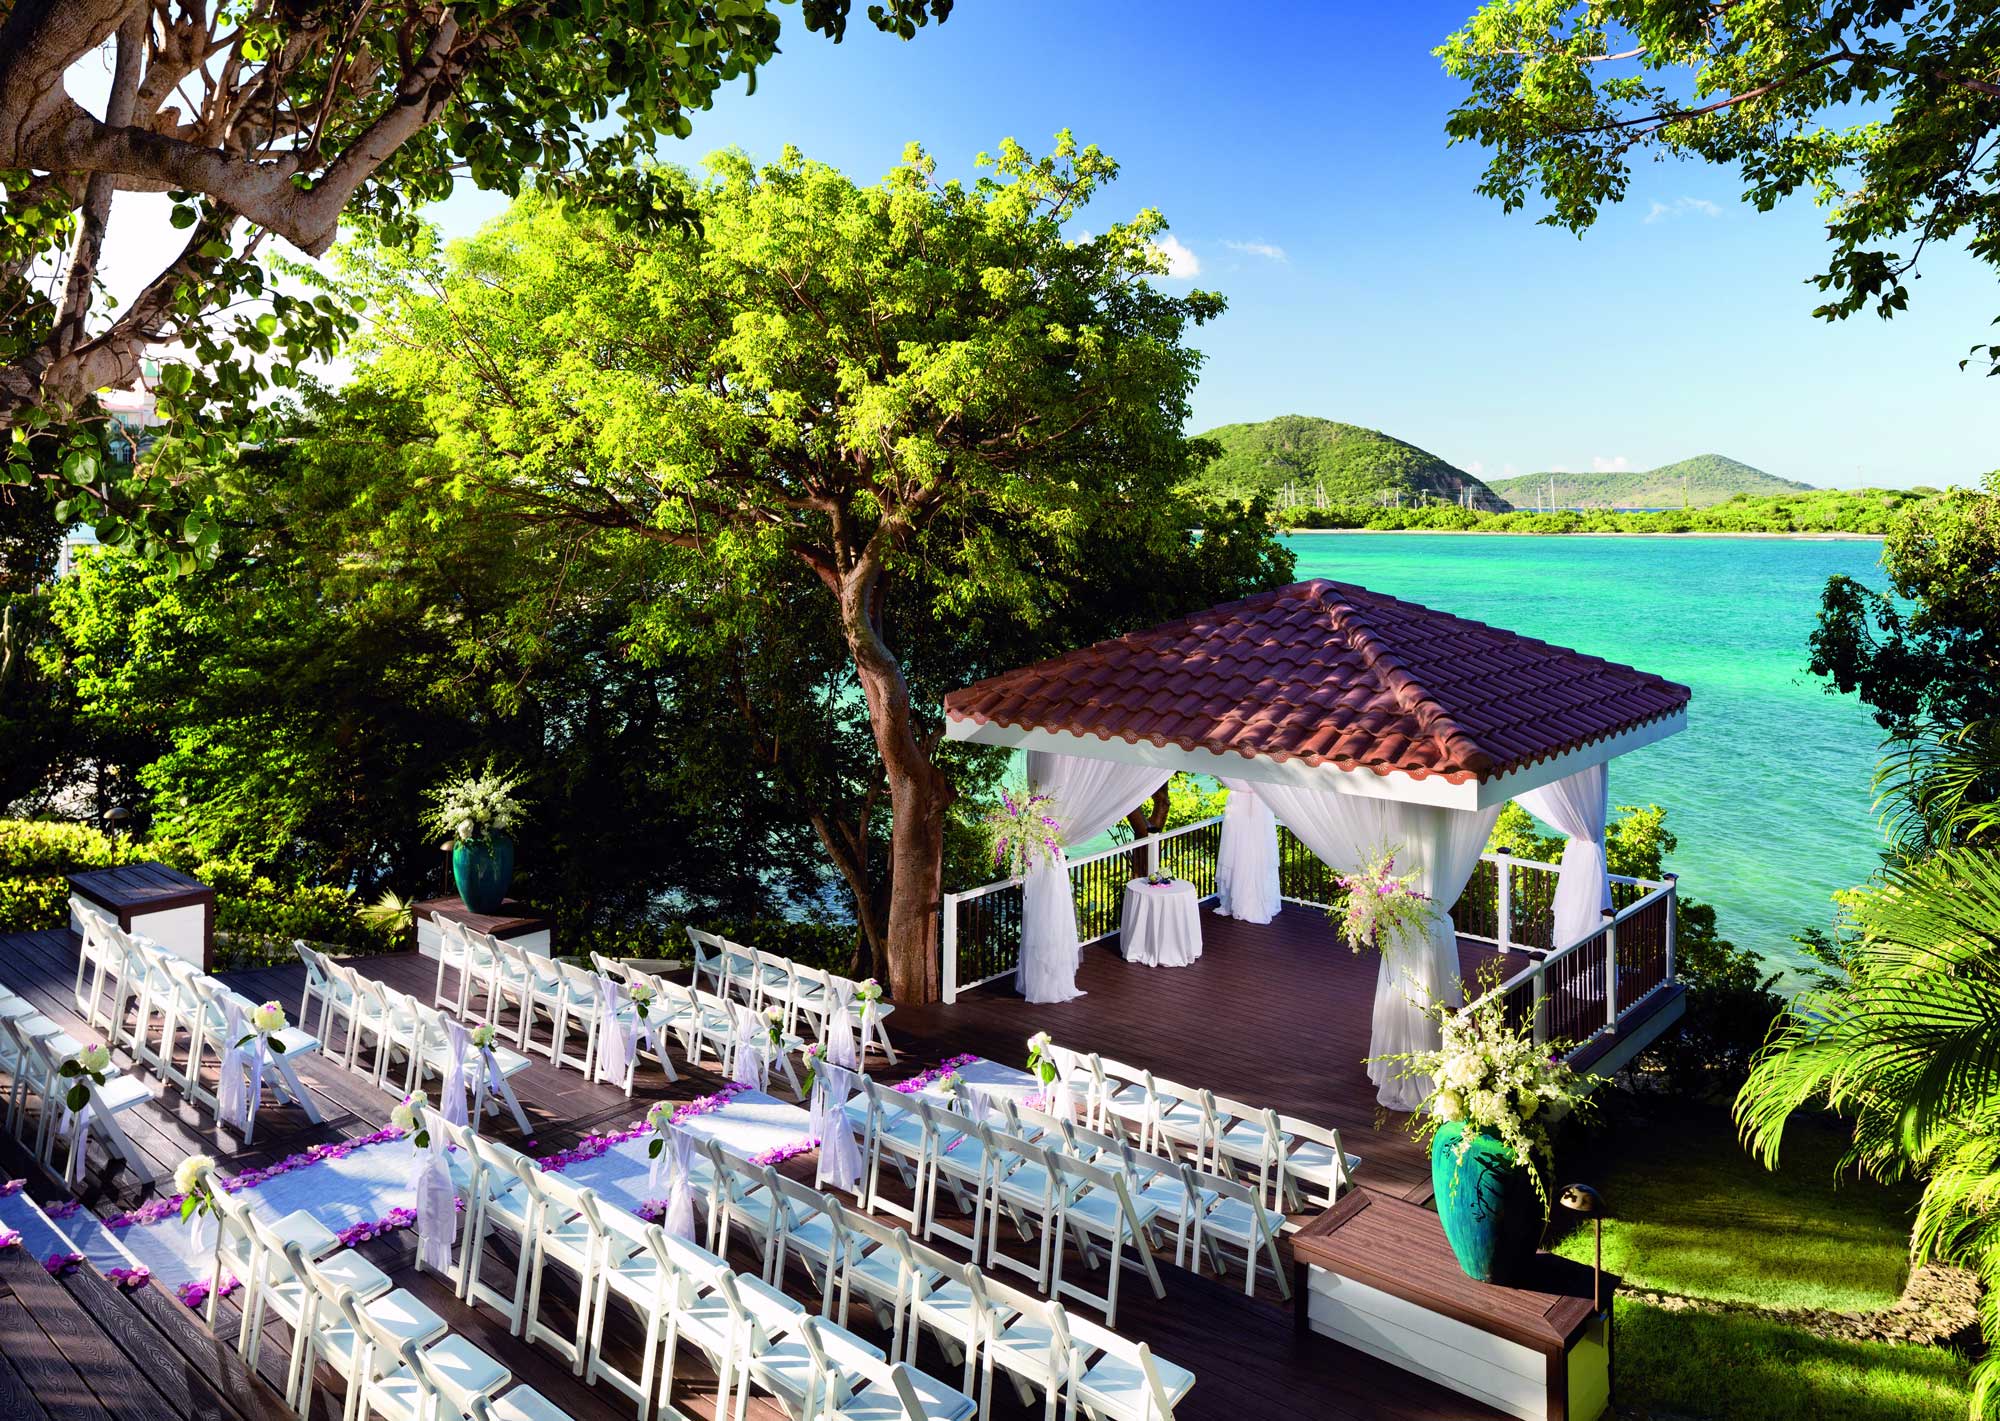 38 Wedding Venues You Have to See | The Ritz-Carlton, St. Thomas, U.S. Virgin Islands